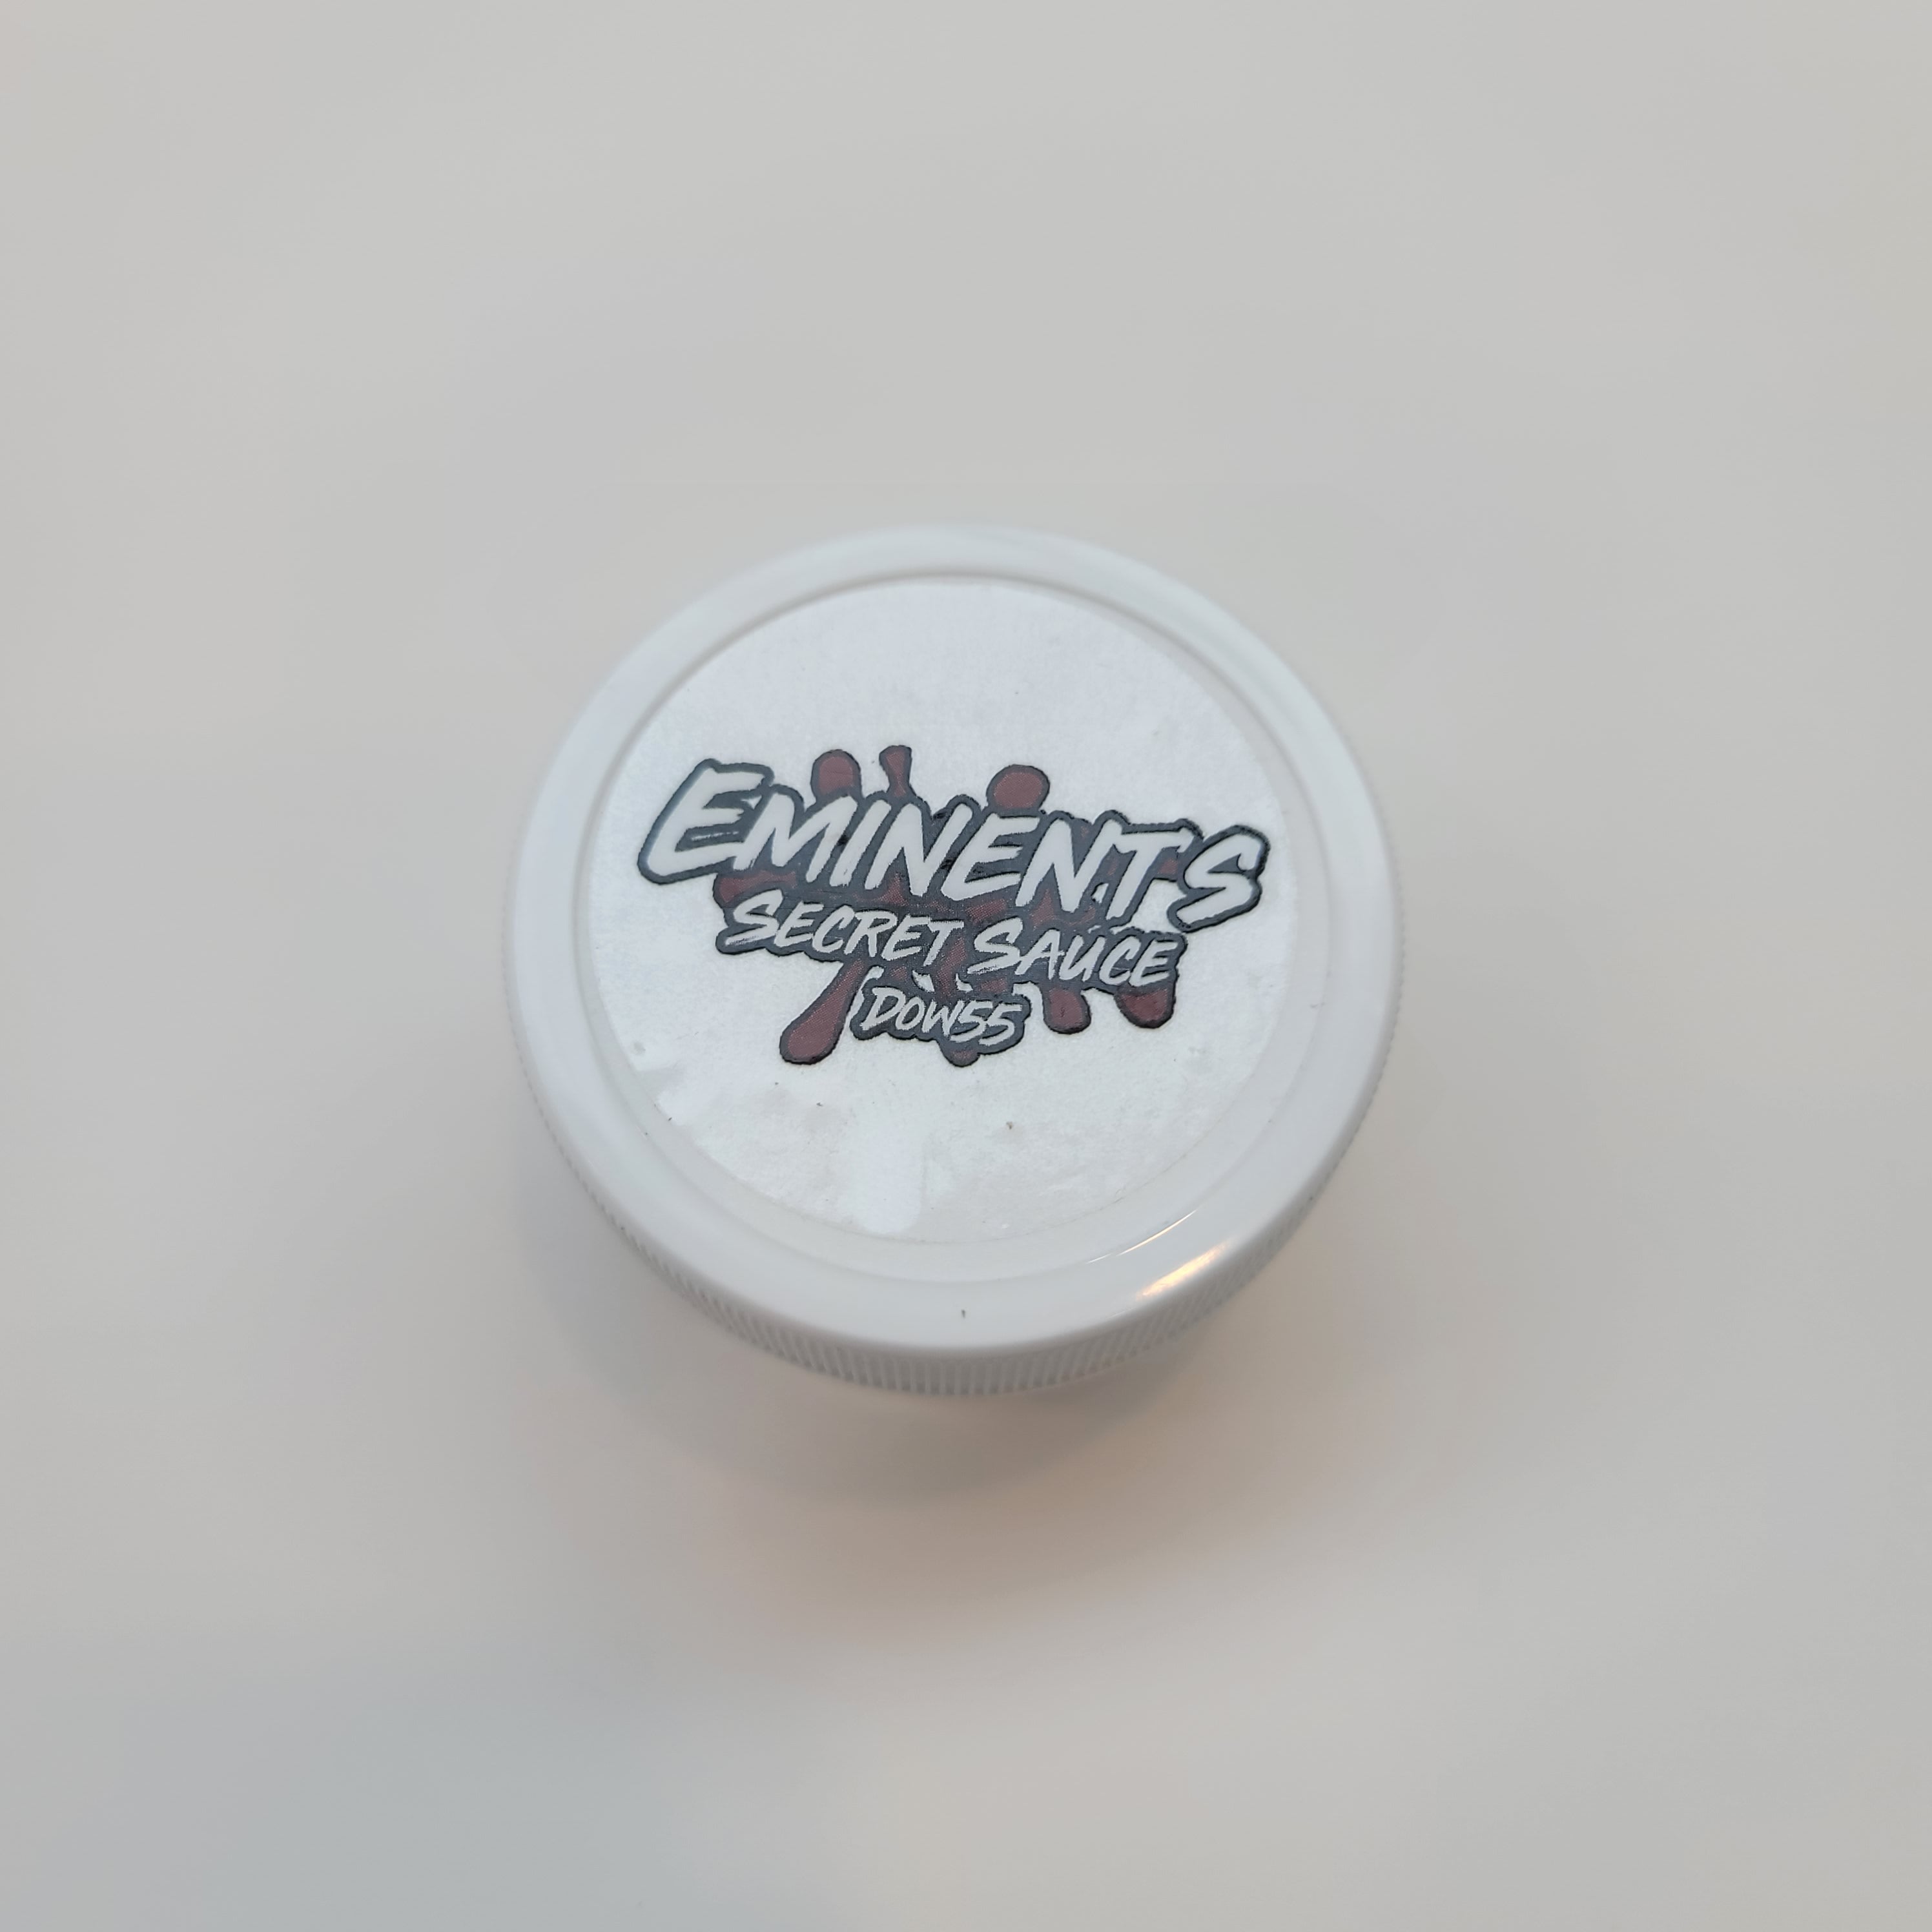 Eminent Secret Sauce - Dow 55 - 2oz - Eminent Paintball And Airsoft